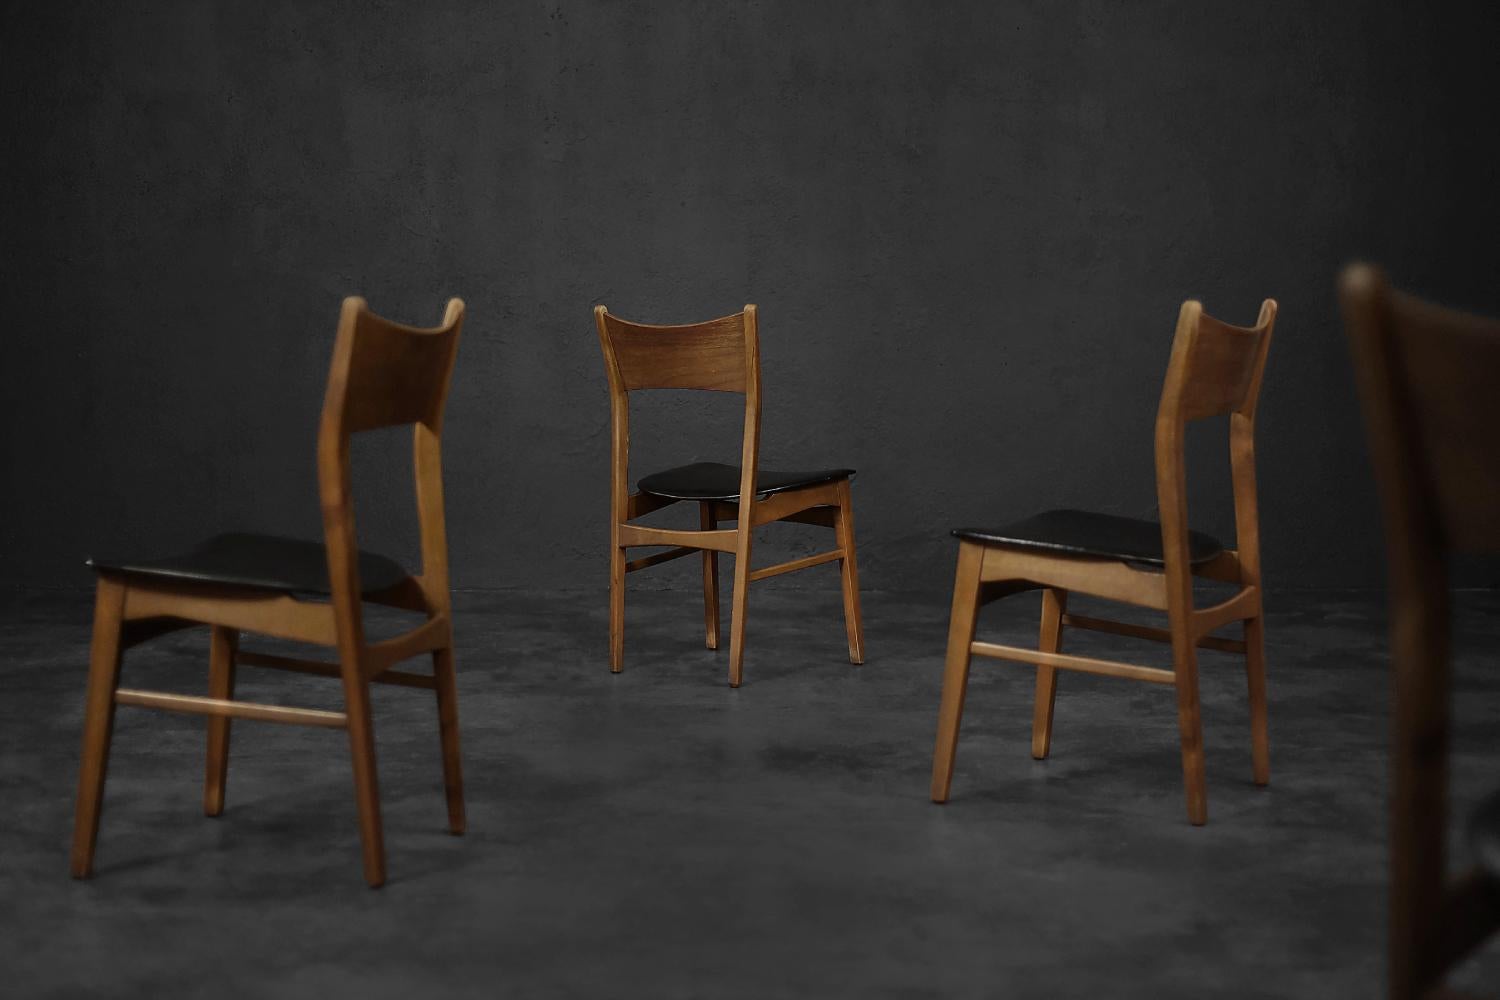 Faux Leather Set of 4 Vintage Mid-Century Modern Scandinavian Dining Chairs in Beech &Teak  For Sale